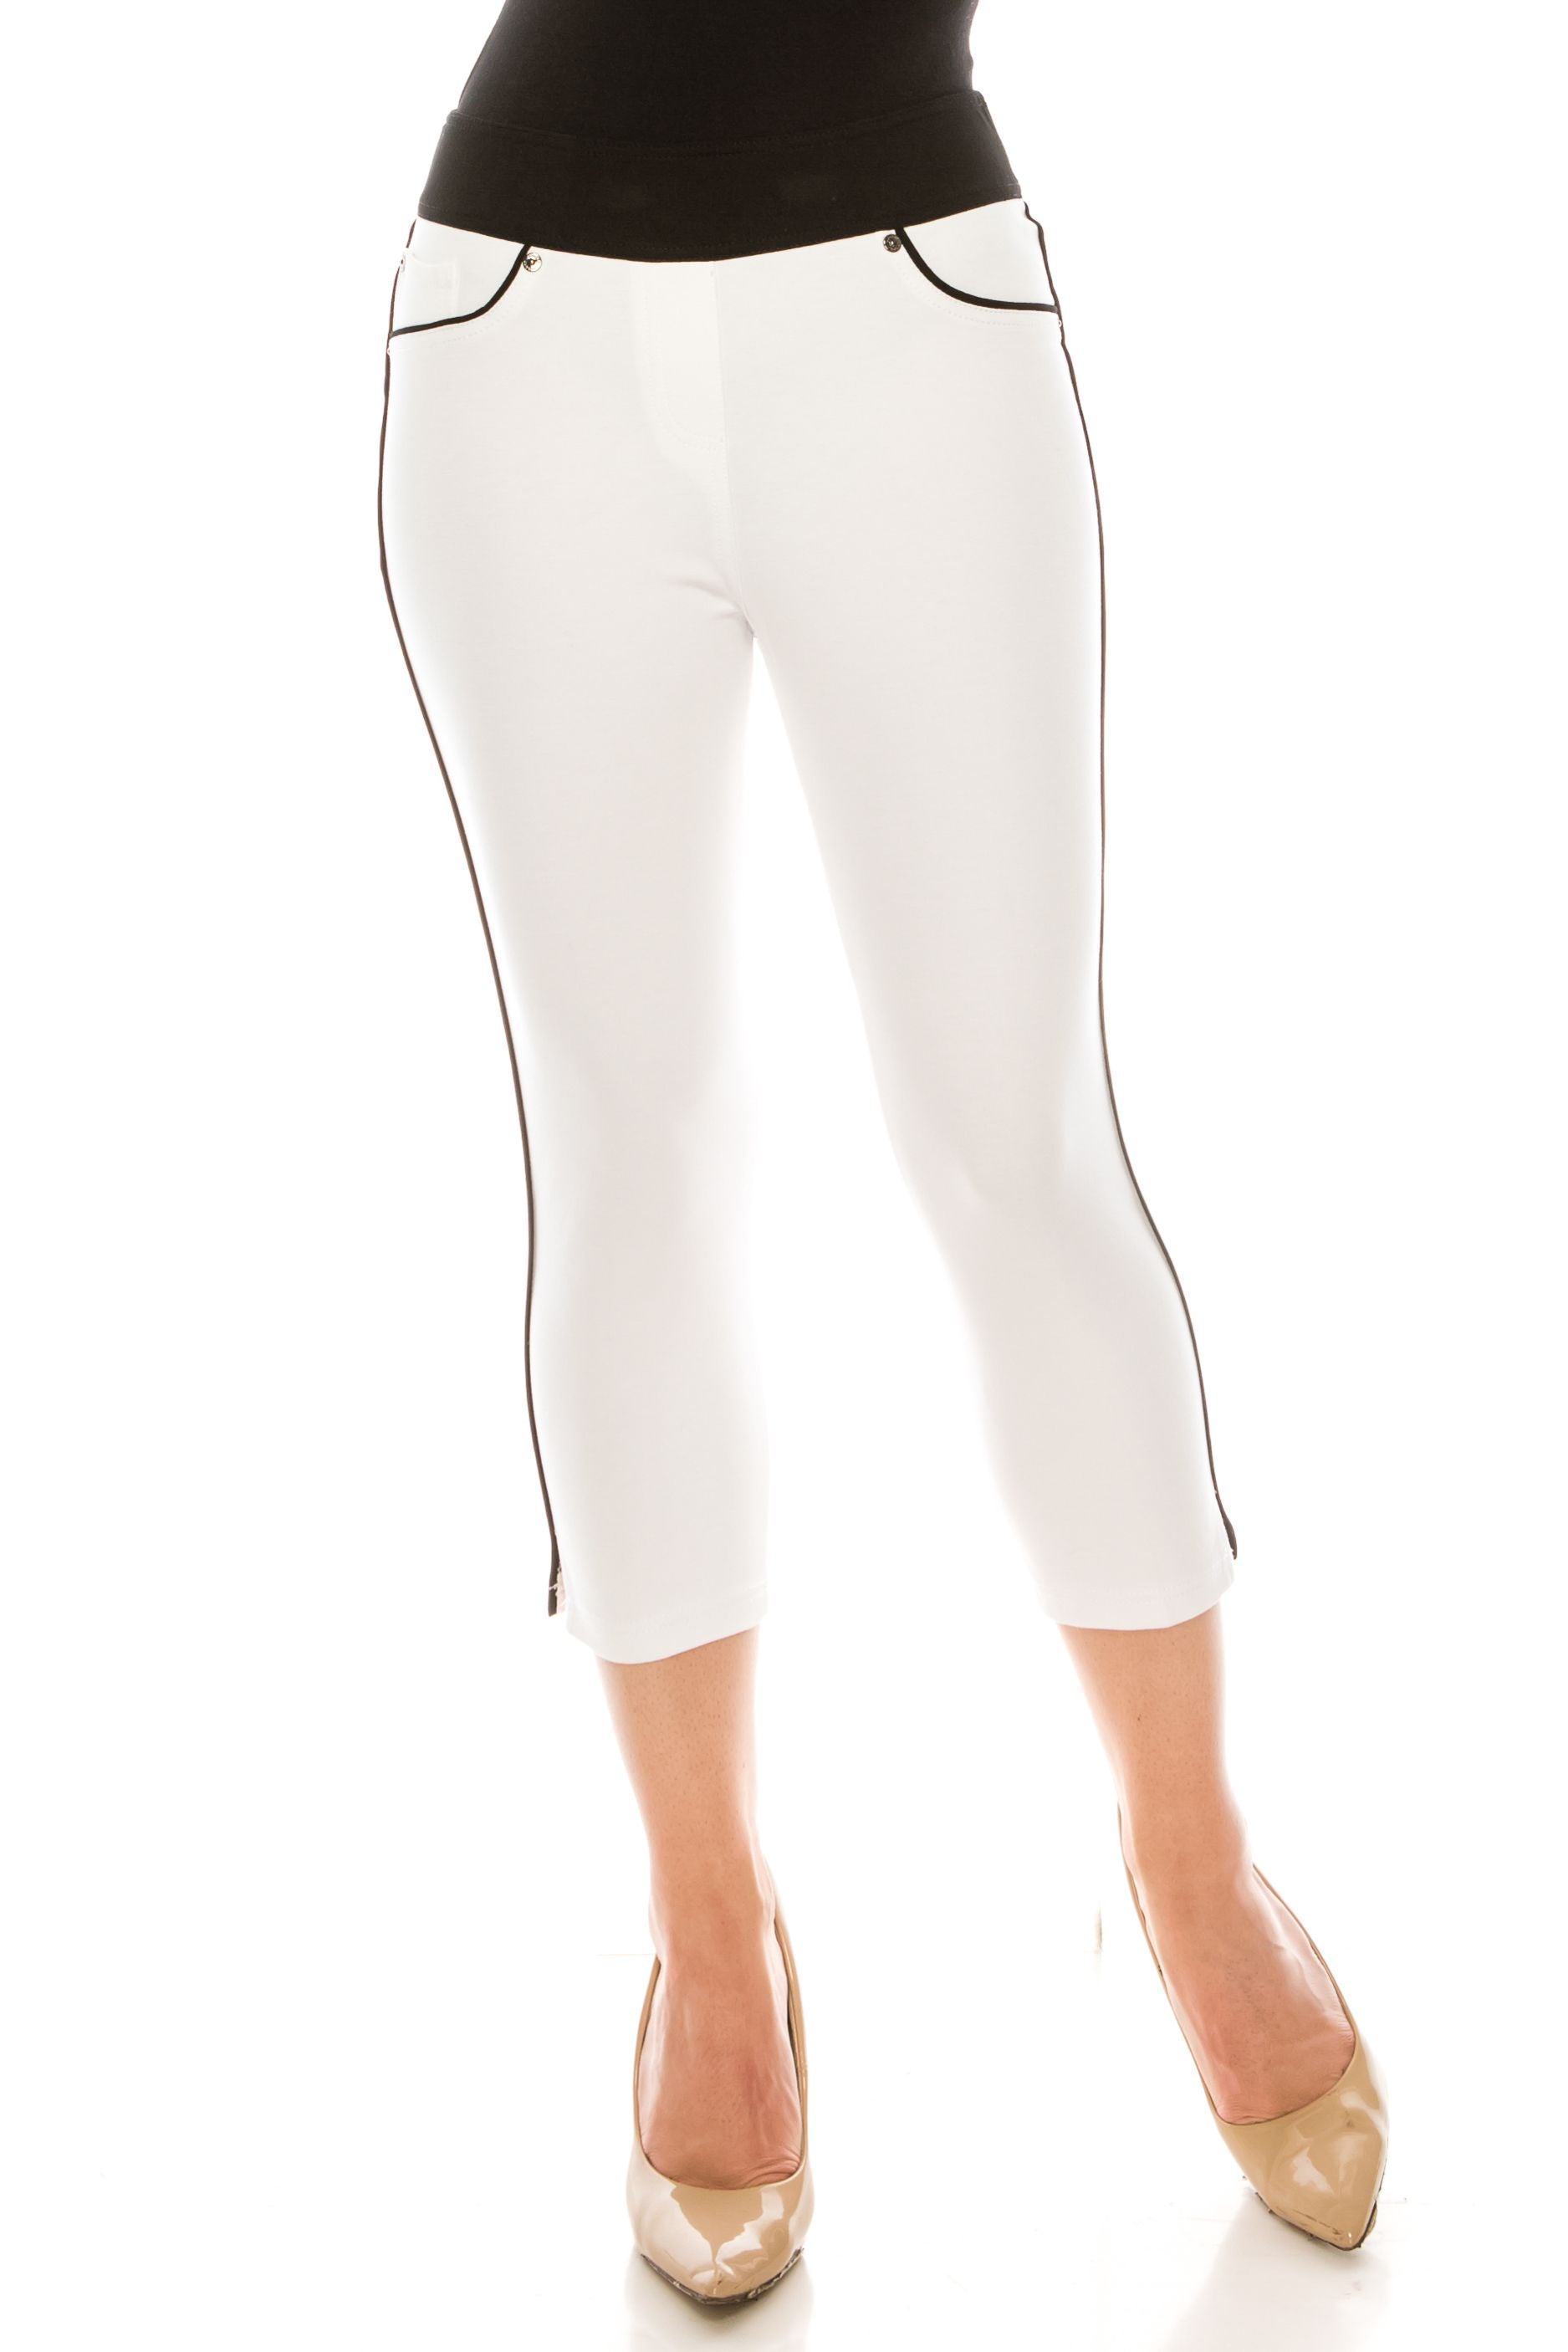 QMilch Black And White Capri Leggings Pants With Slimming Bottom